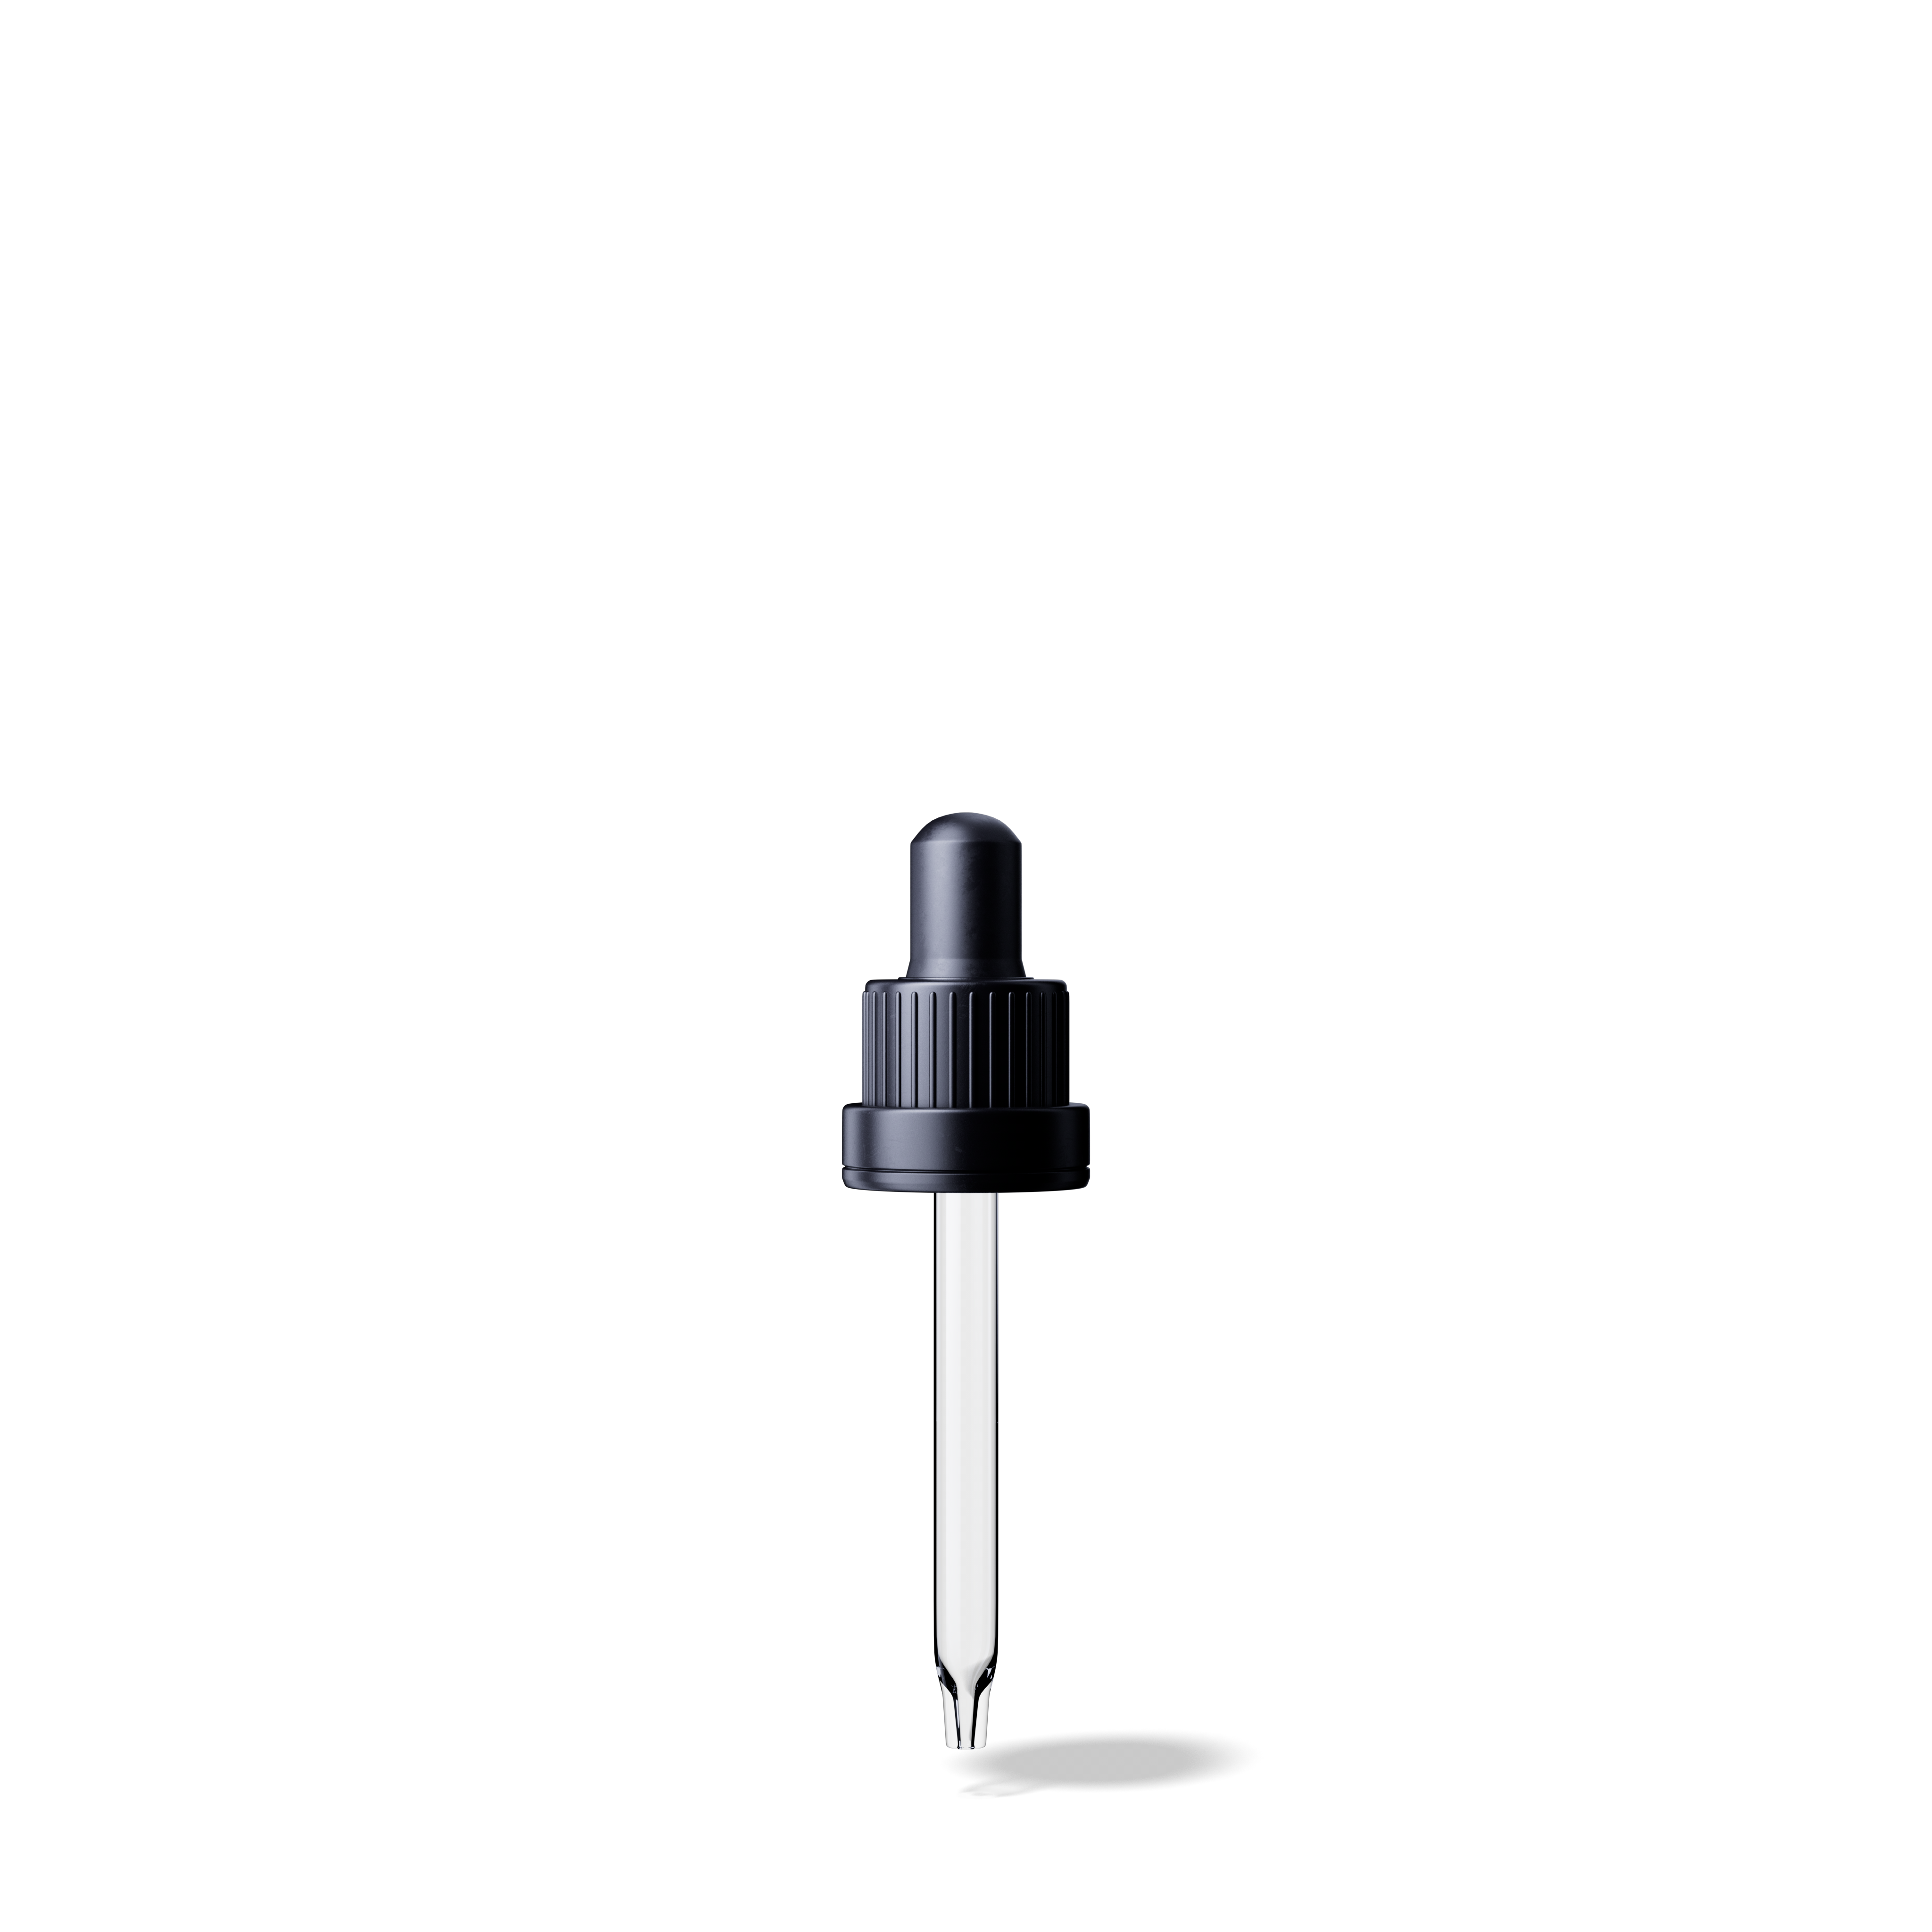 Pipette tamper evident DIN18, III, black, ribbed, bulb NBR, dose 0.7ml, conical tip (Orion 20)